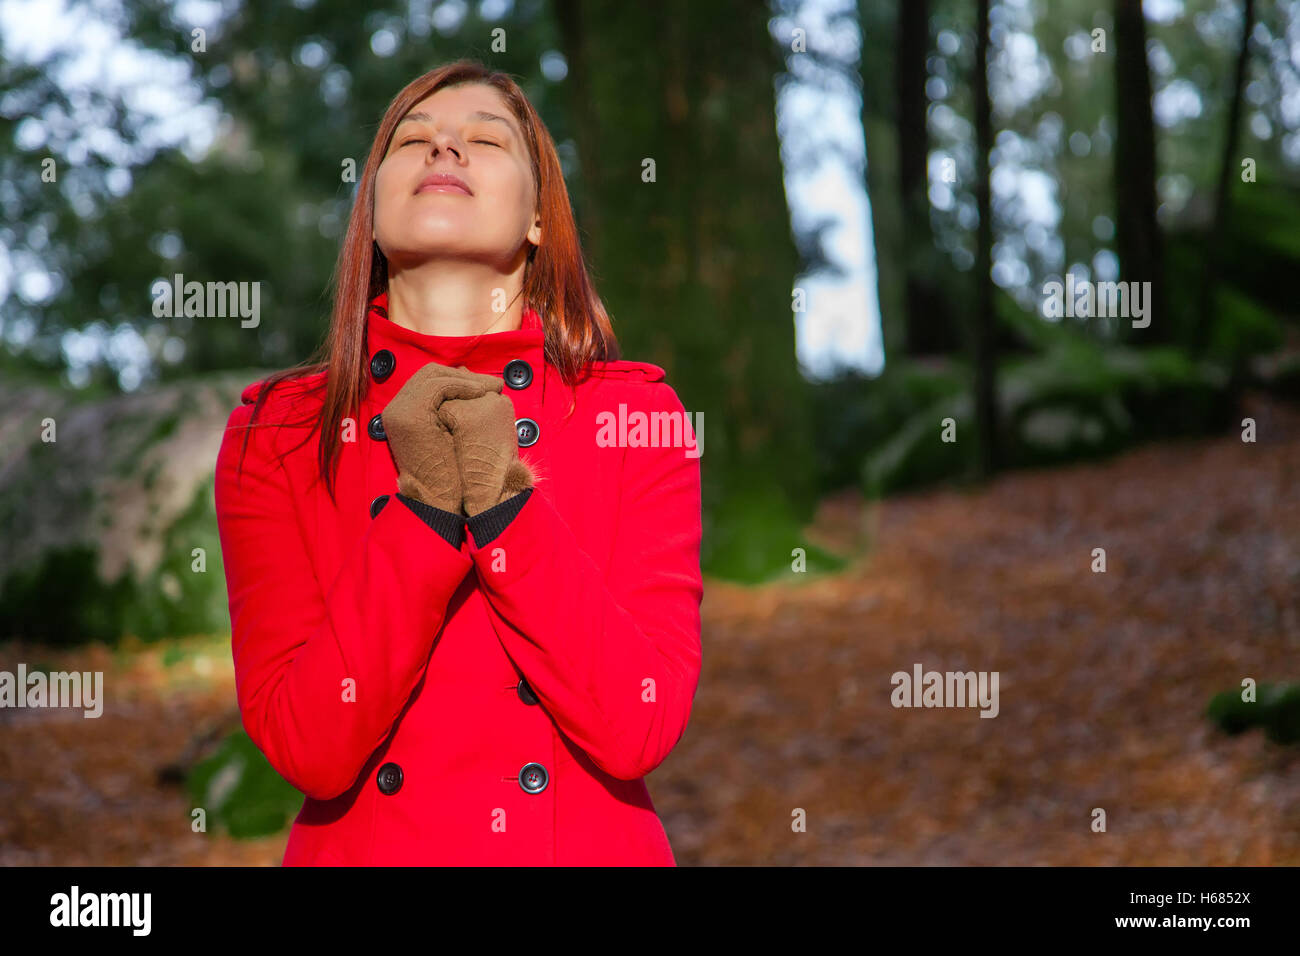 Woman enjoying the warmth of the winter sunlight on a forest wearing a red overcoat Stock Photo